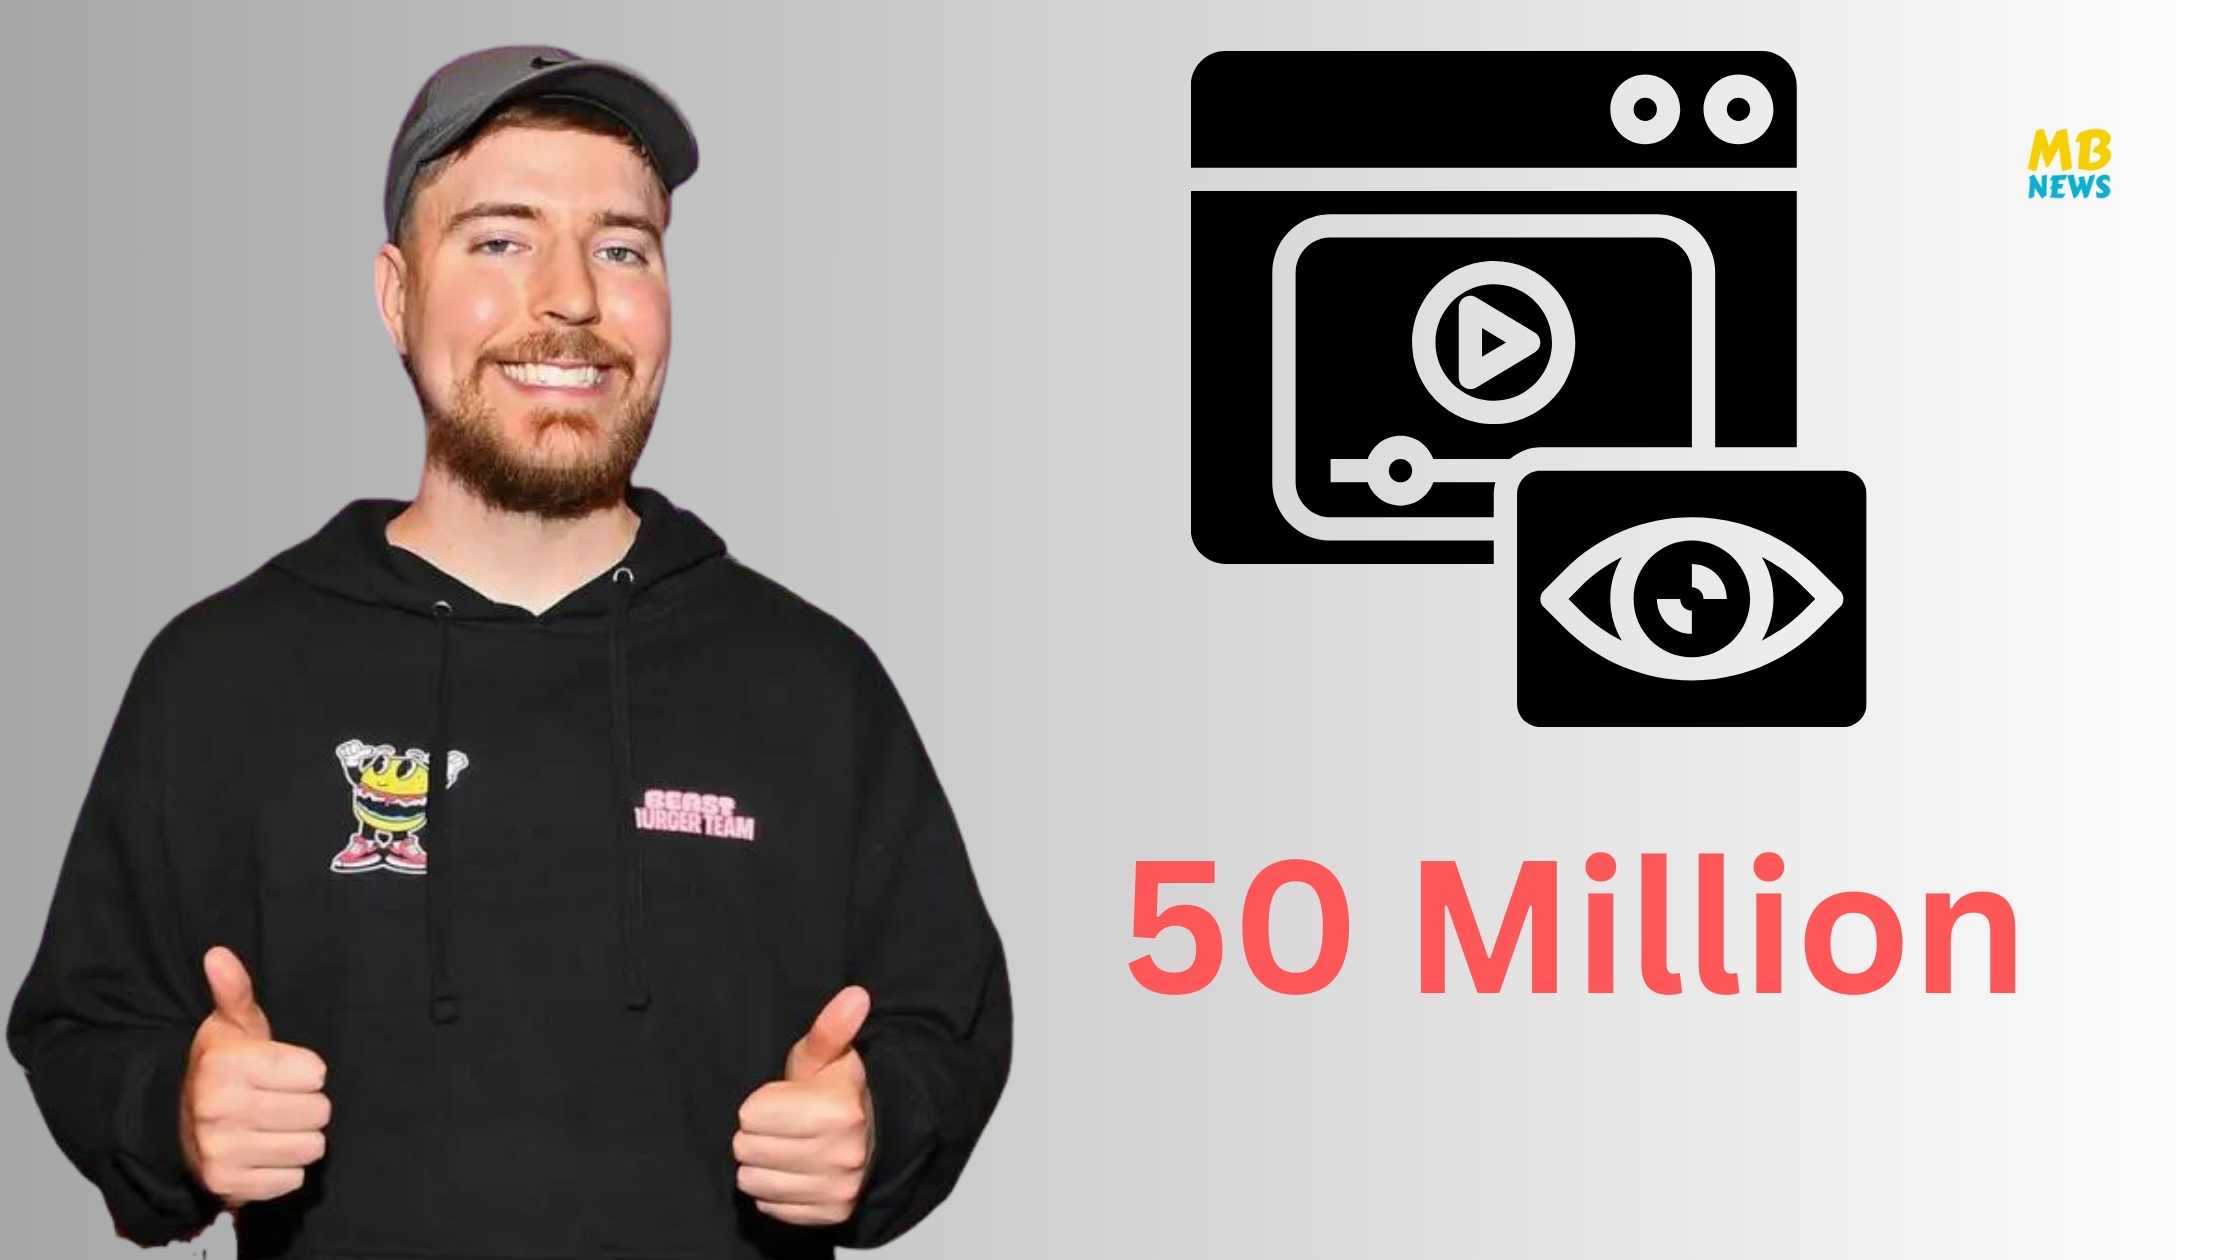 MrBeast's Latest Video Break Records with 50 Million Views and Exceptional Retention Rates!